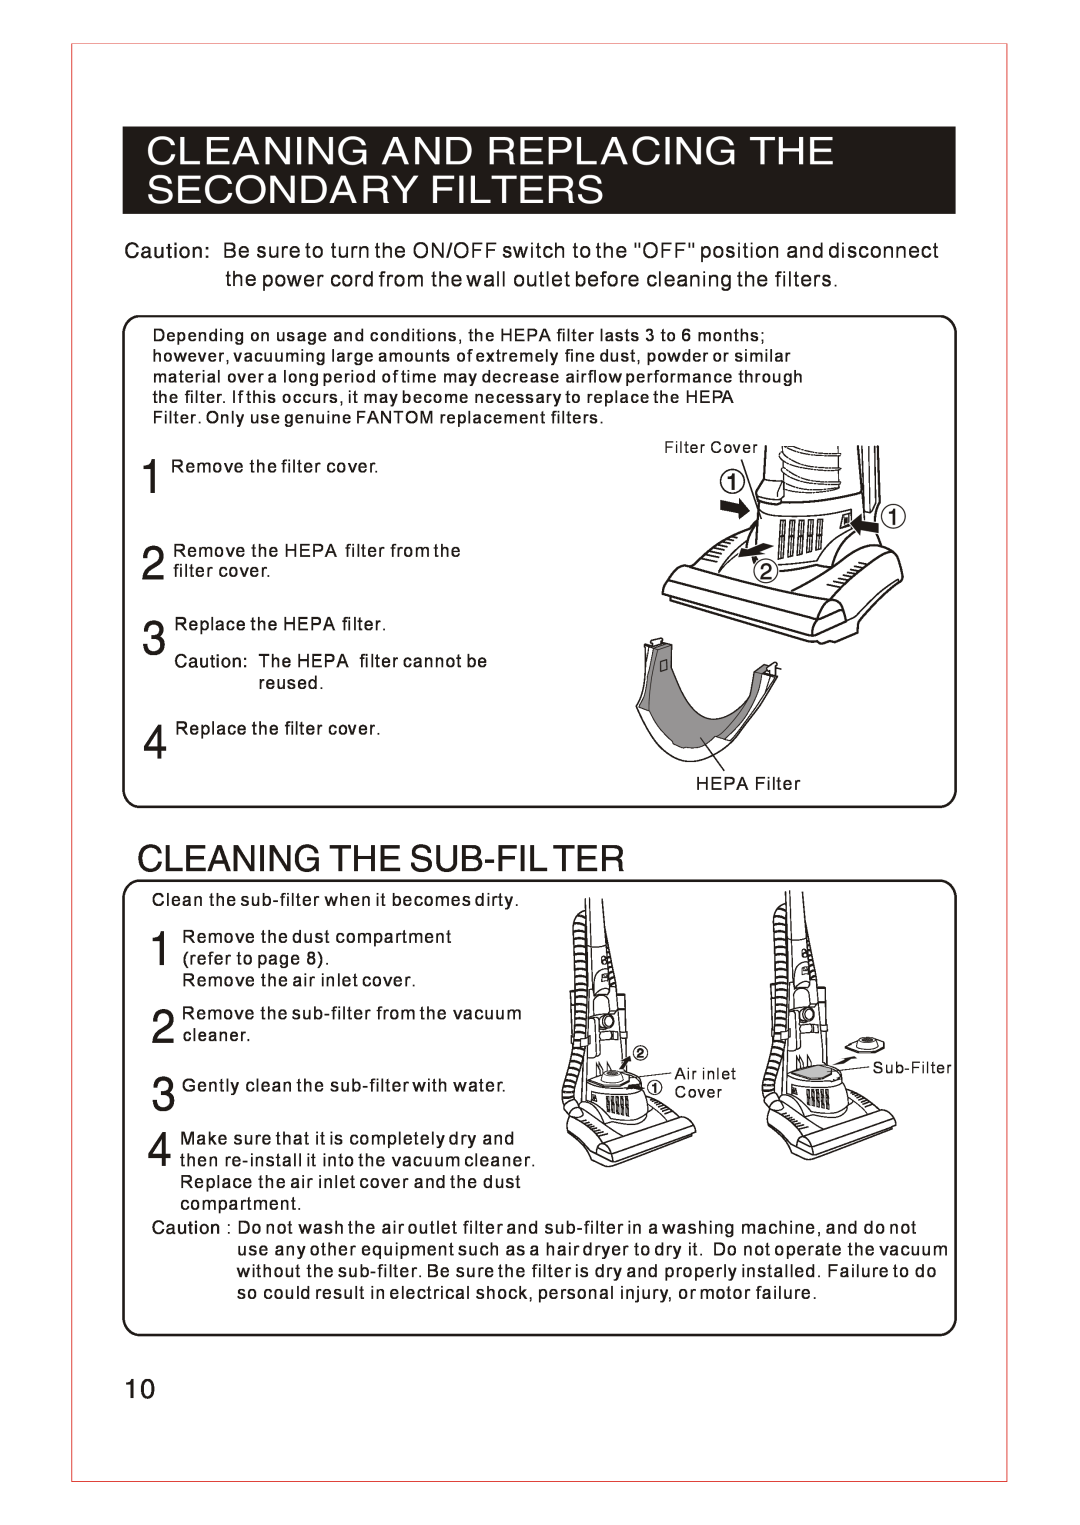 Fantom Vacuum FM740 instruction manual Cleaning And Replacing The Secondary Filters, Cleaning The Sub-Fil Ter 